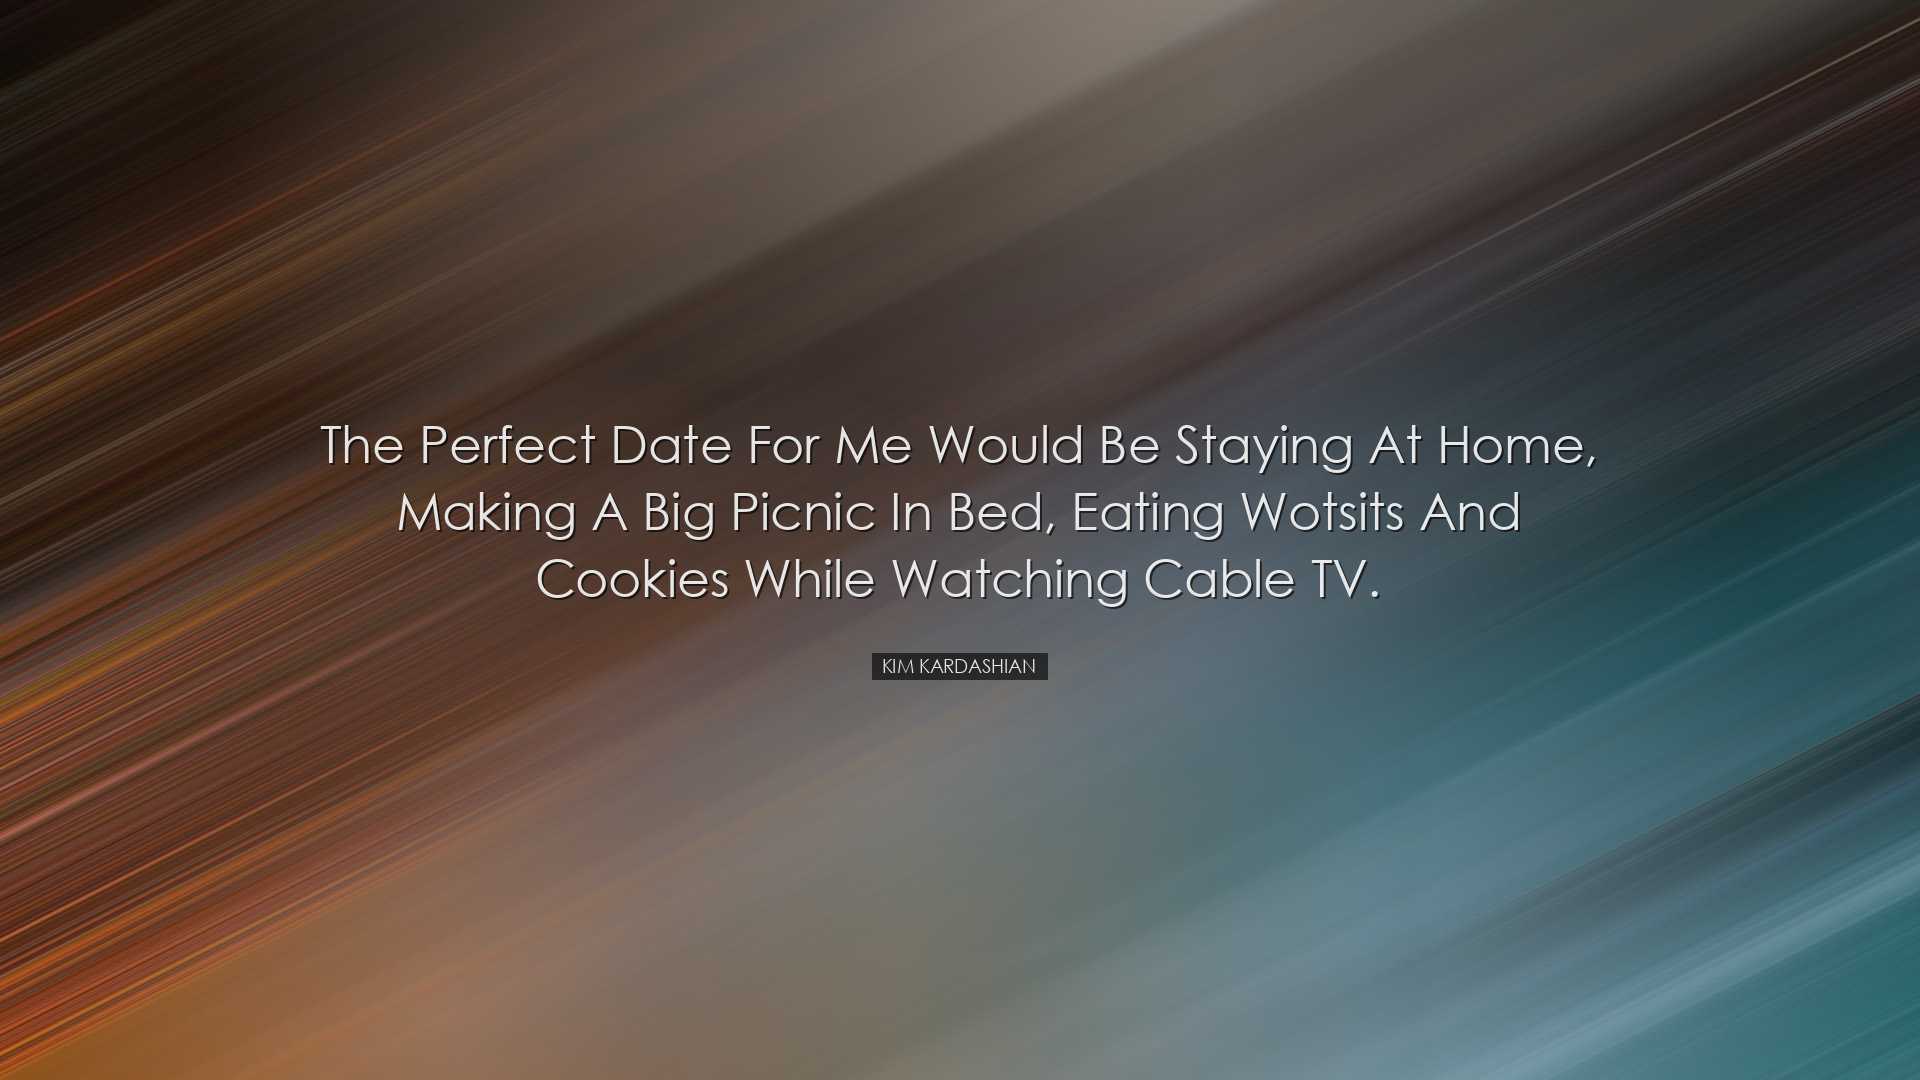 The perfect date for me would be staying at home, making a big pic